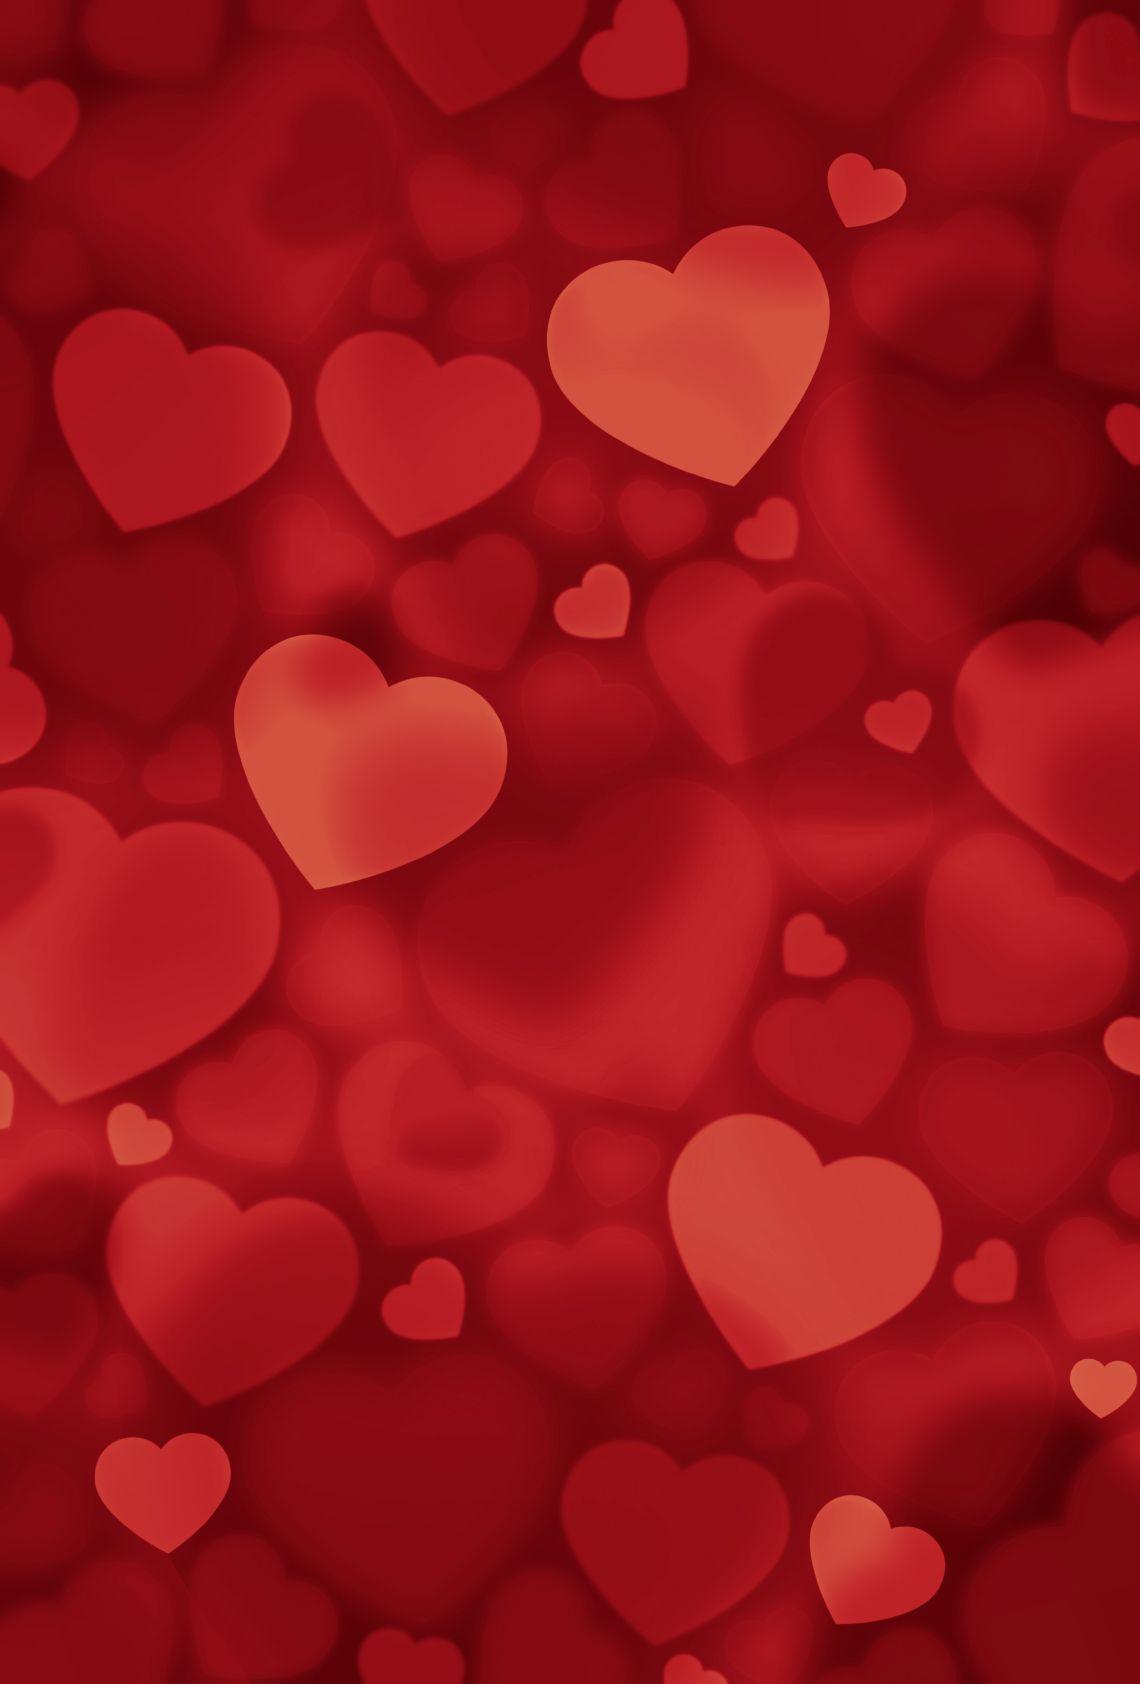 Red Love Heart Wallpapers - Top Free Red Love Heart Backgrounds ...